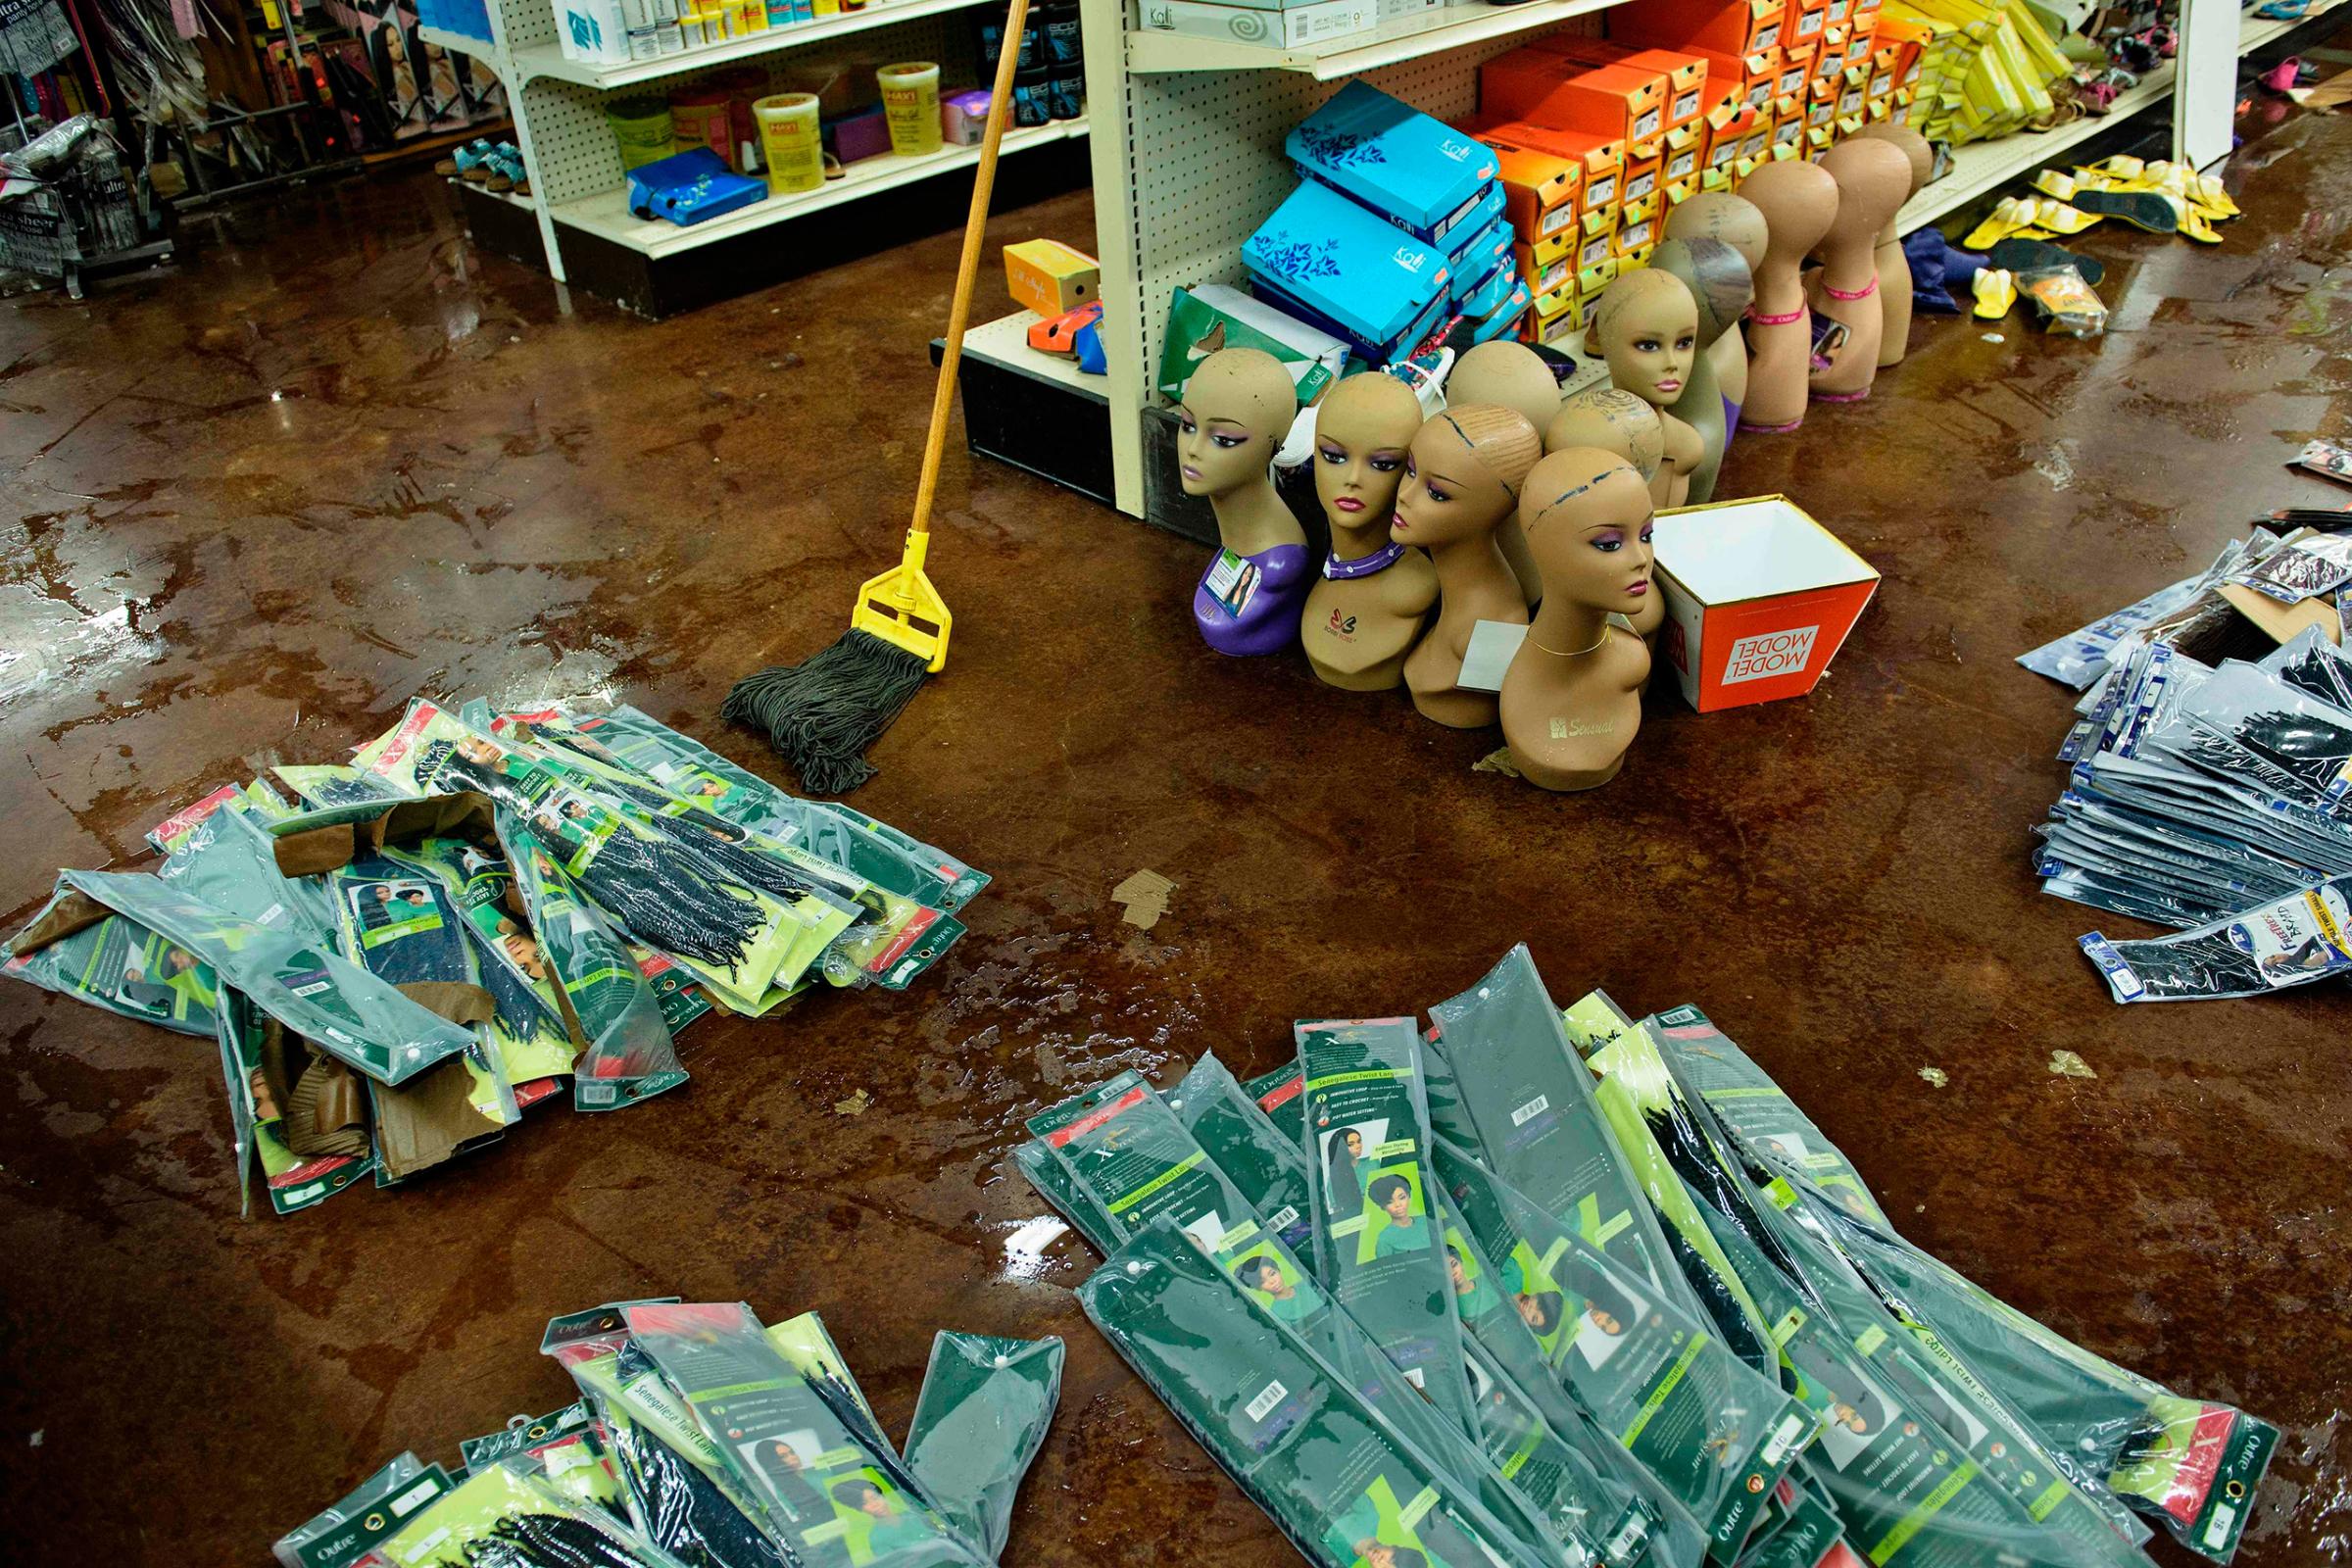 Damaged products are seen at Jasmine's Beauty Supply following the floods in Baton Rouge, La., on Aug. 16, 2016.